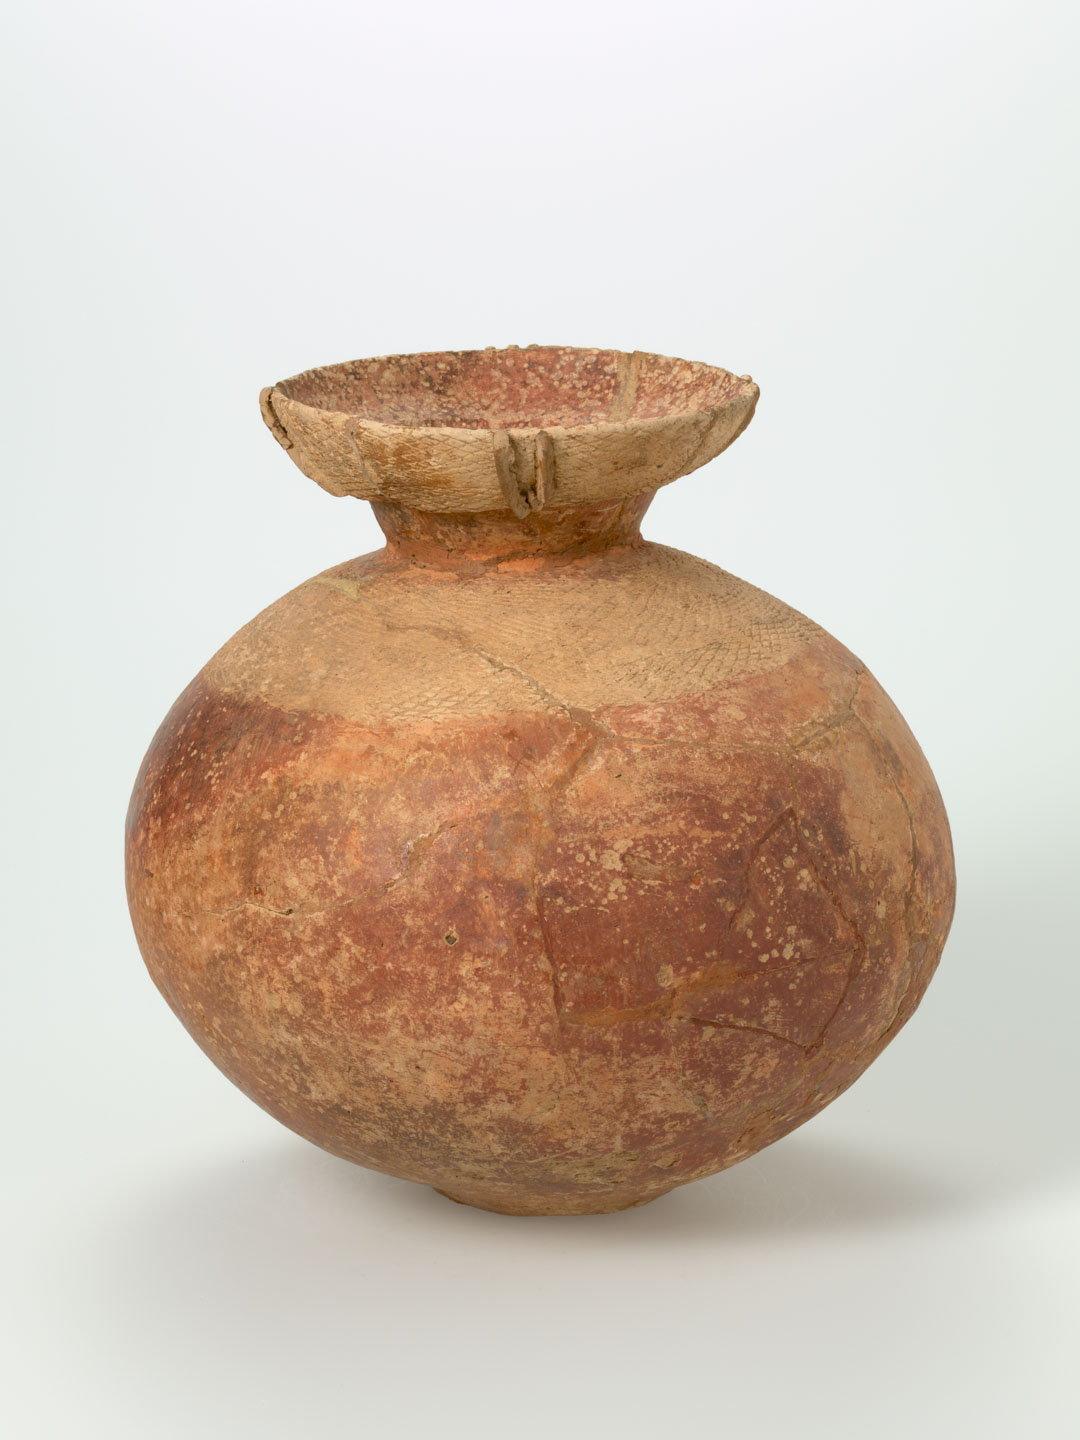 Artwork Jar this artwork made of Earthenware, hand-built spherical form with net design incised at shoulder and on flaring lip